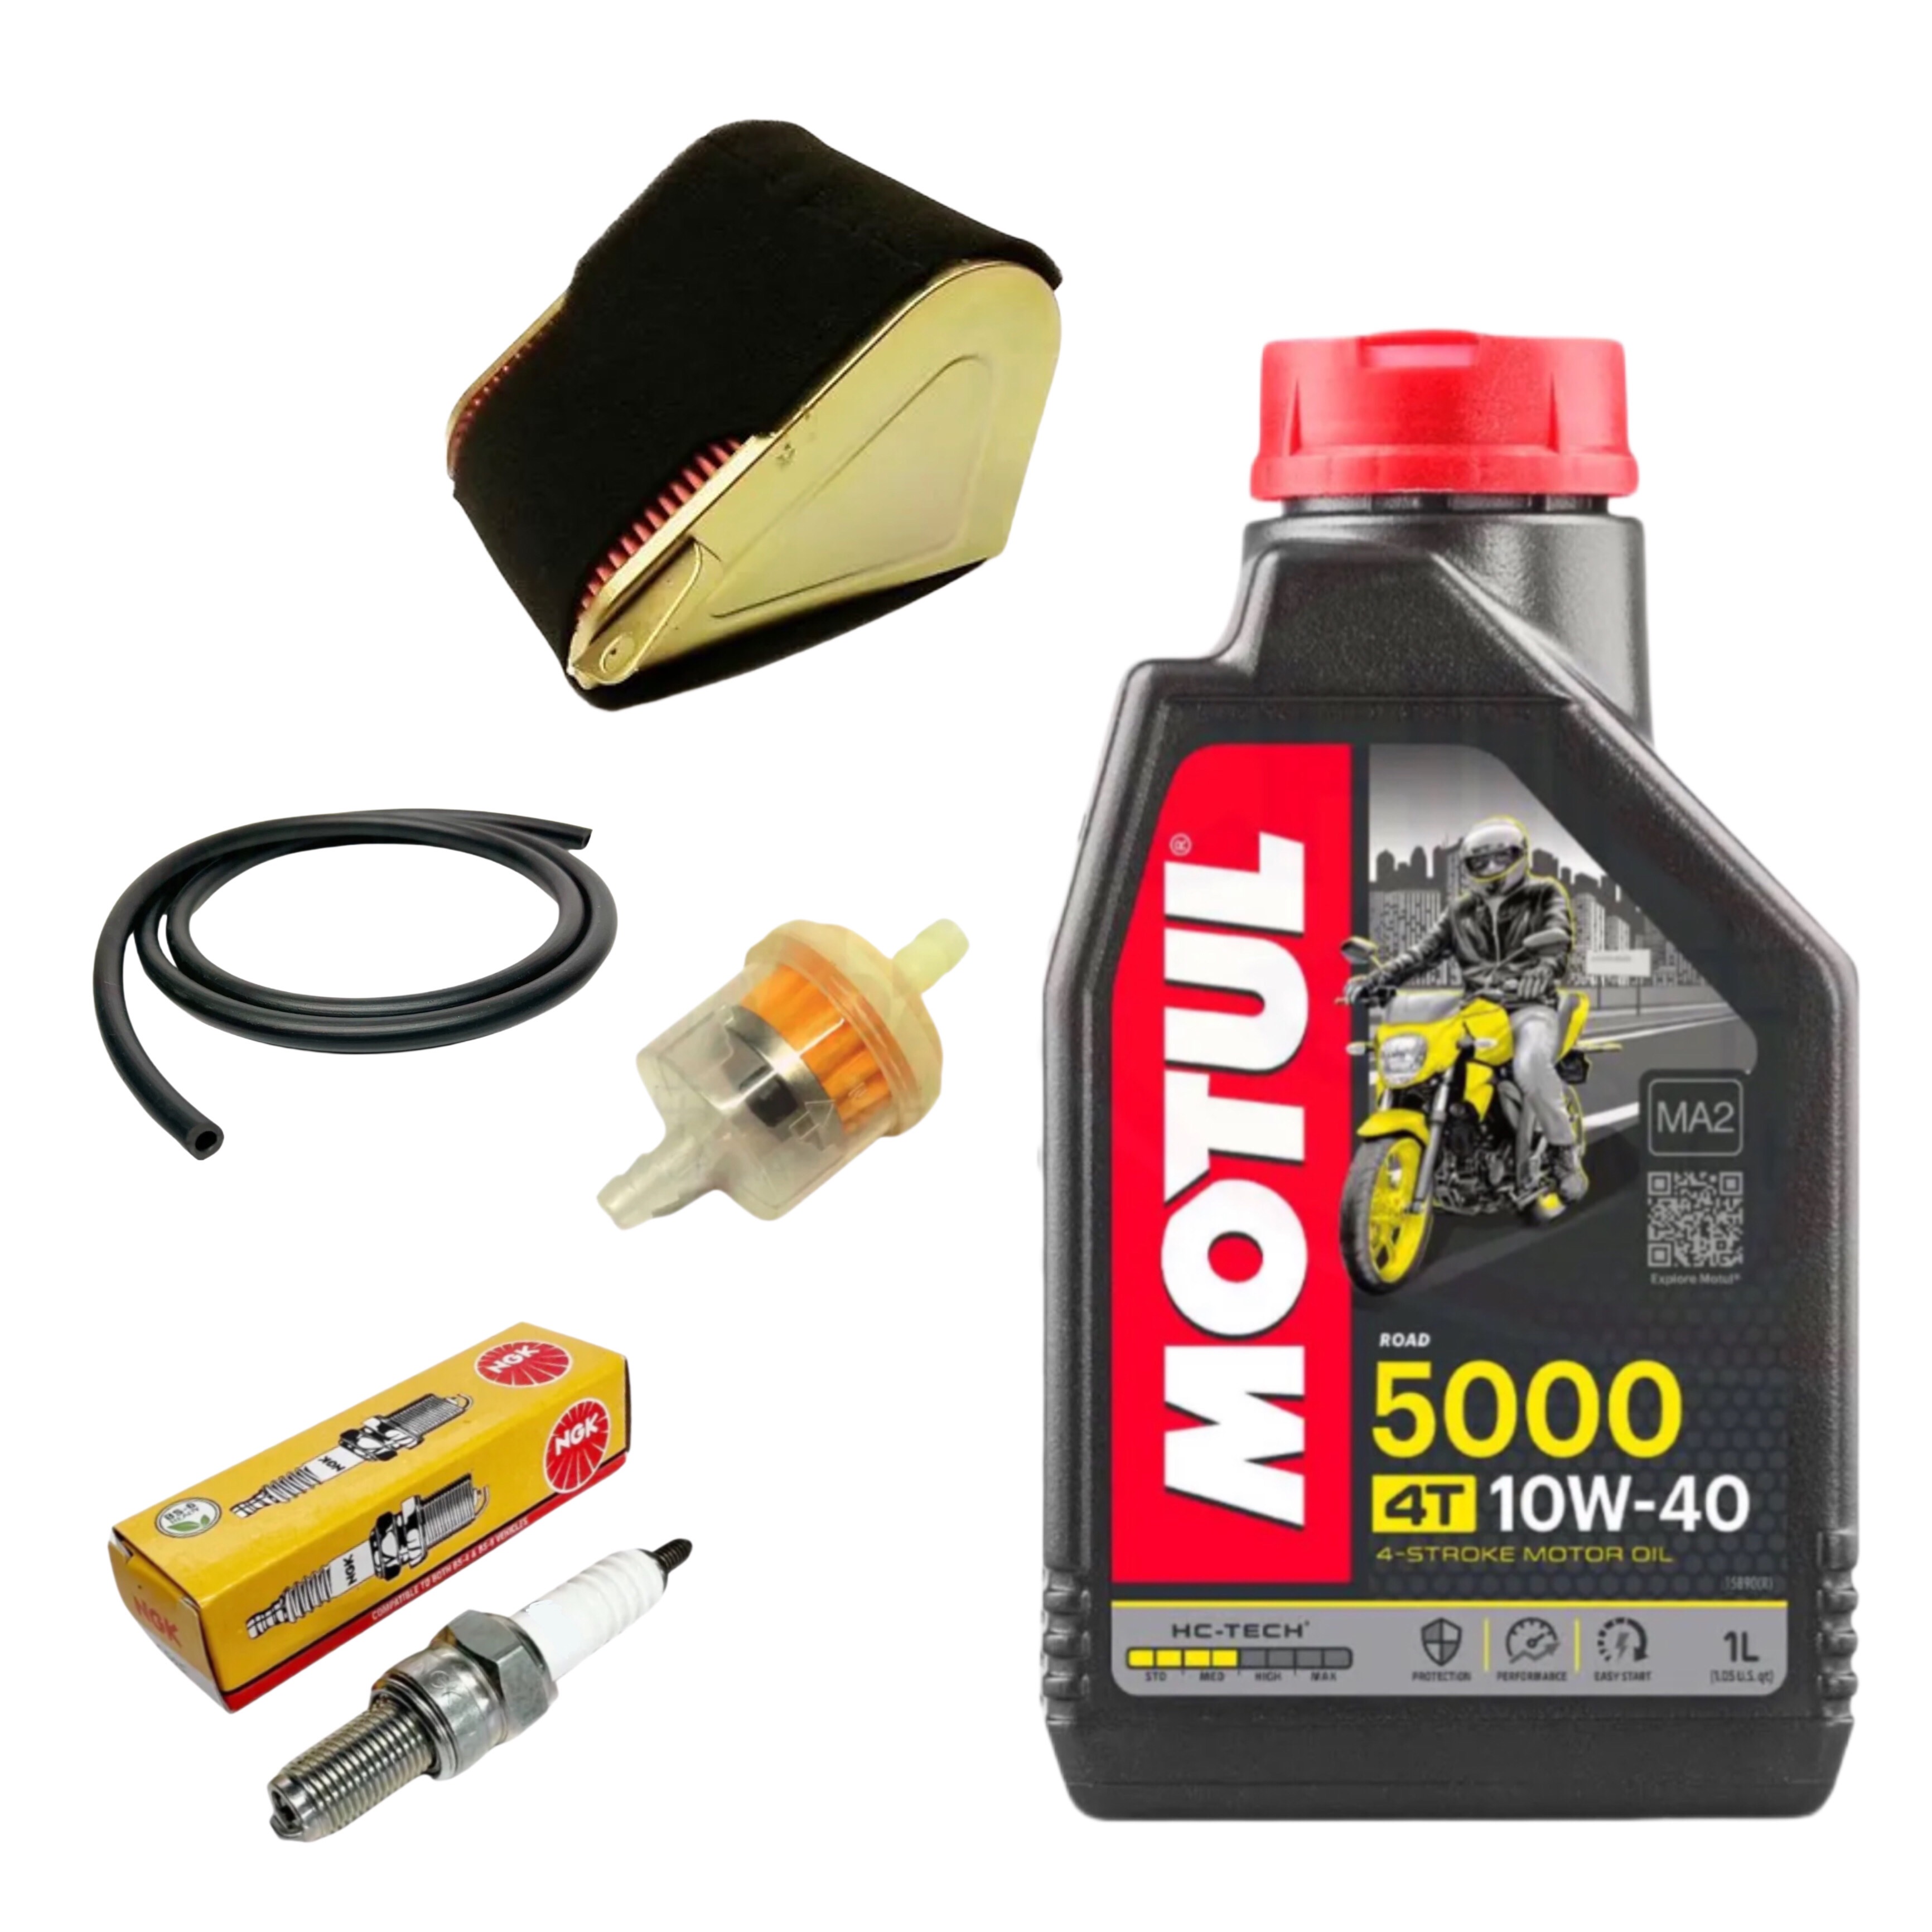 Service Kit 125cc Scooter for 152QMI